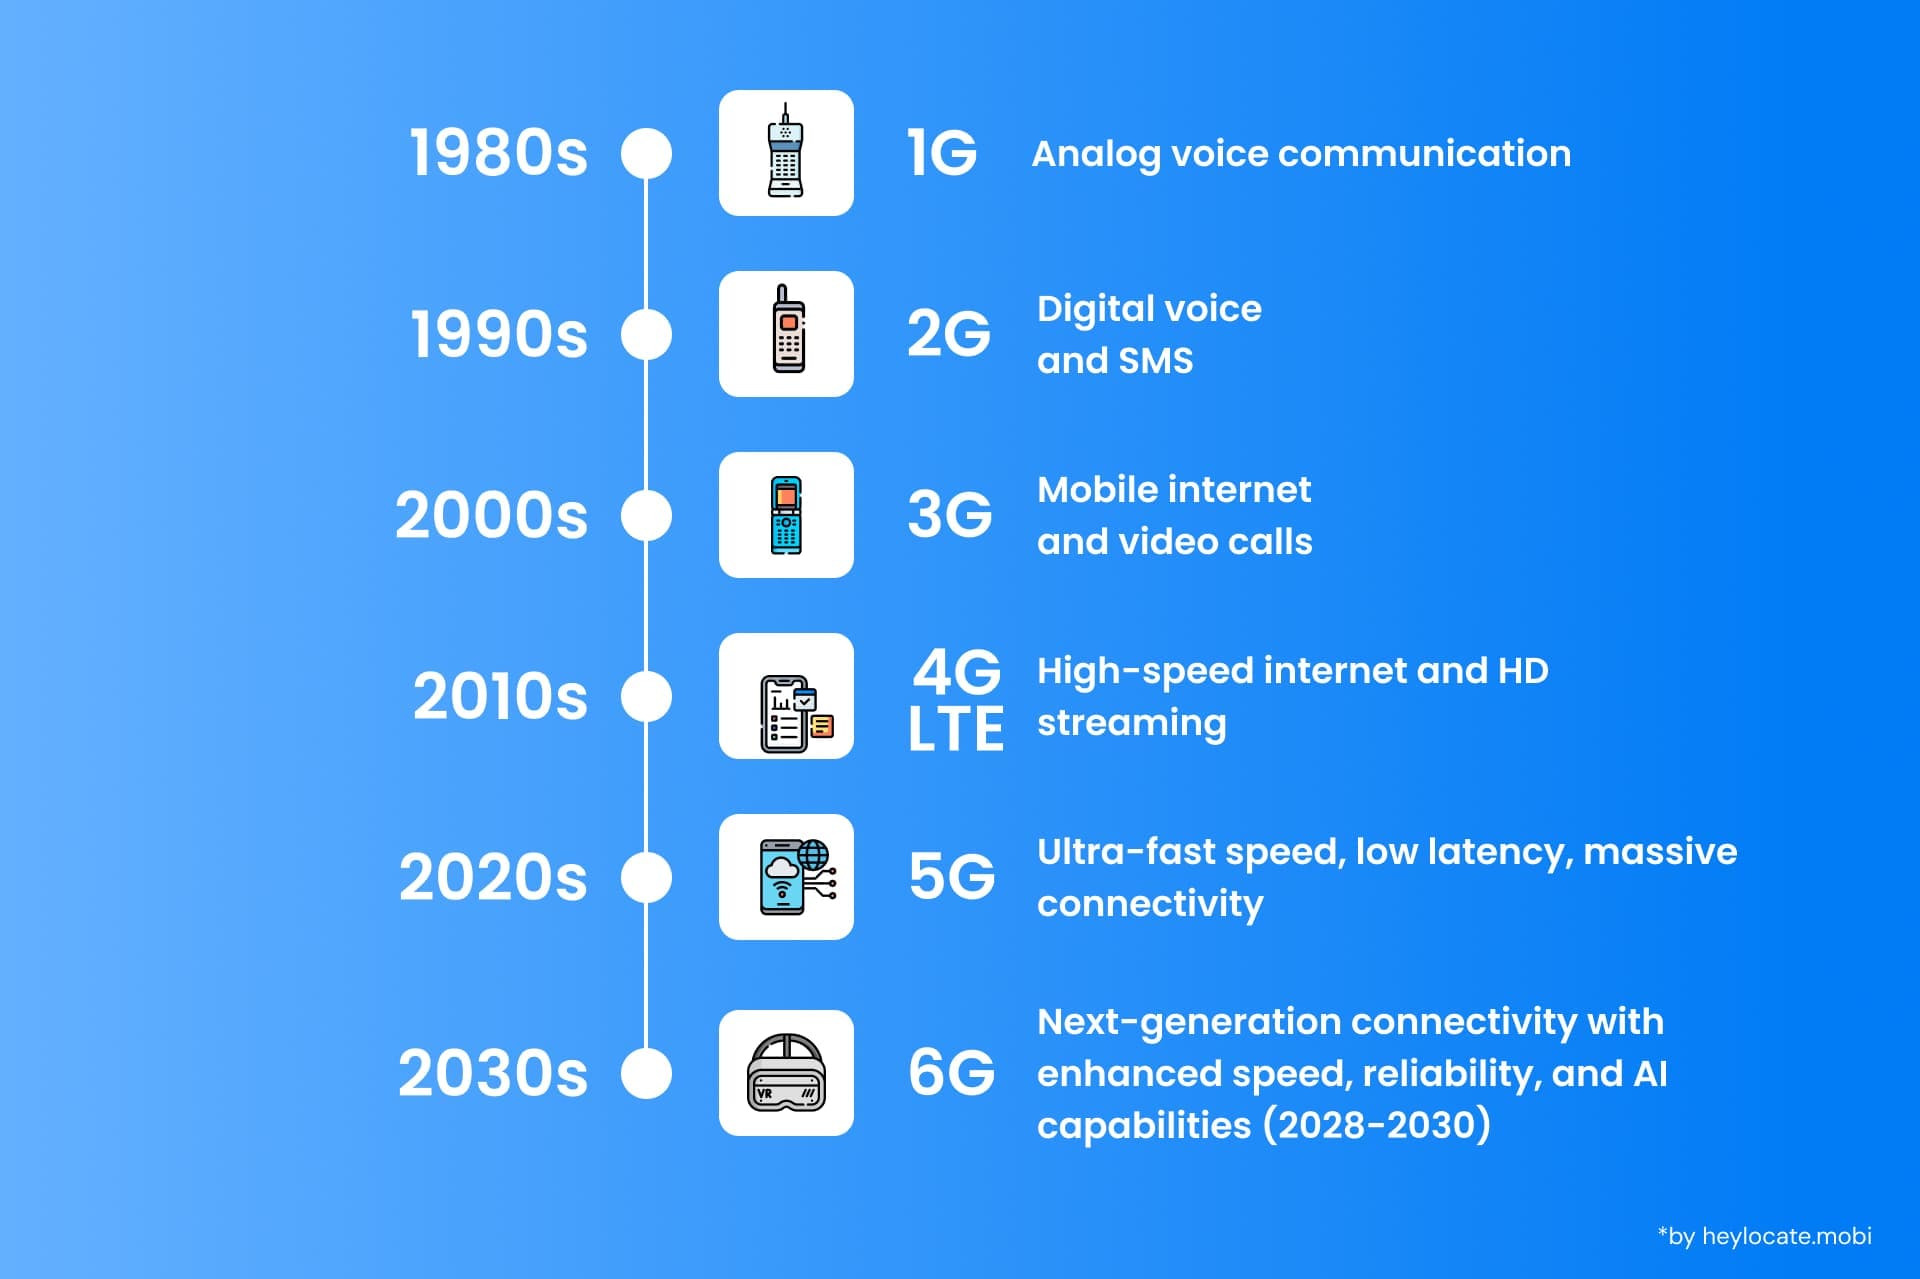 Timeline graphic showcasing the evolution of mobile communication technology from the 1980s through the 2030s, with illustrations for 1G through 6G, with each generation's breakthroughs in connectivity and speeds